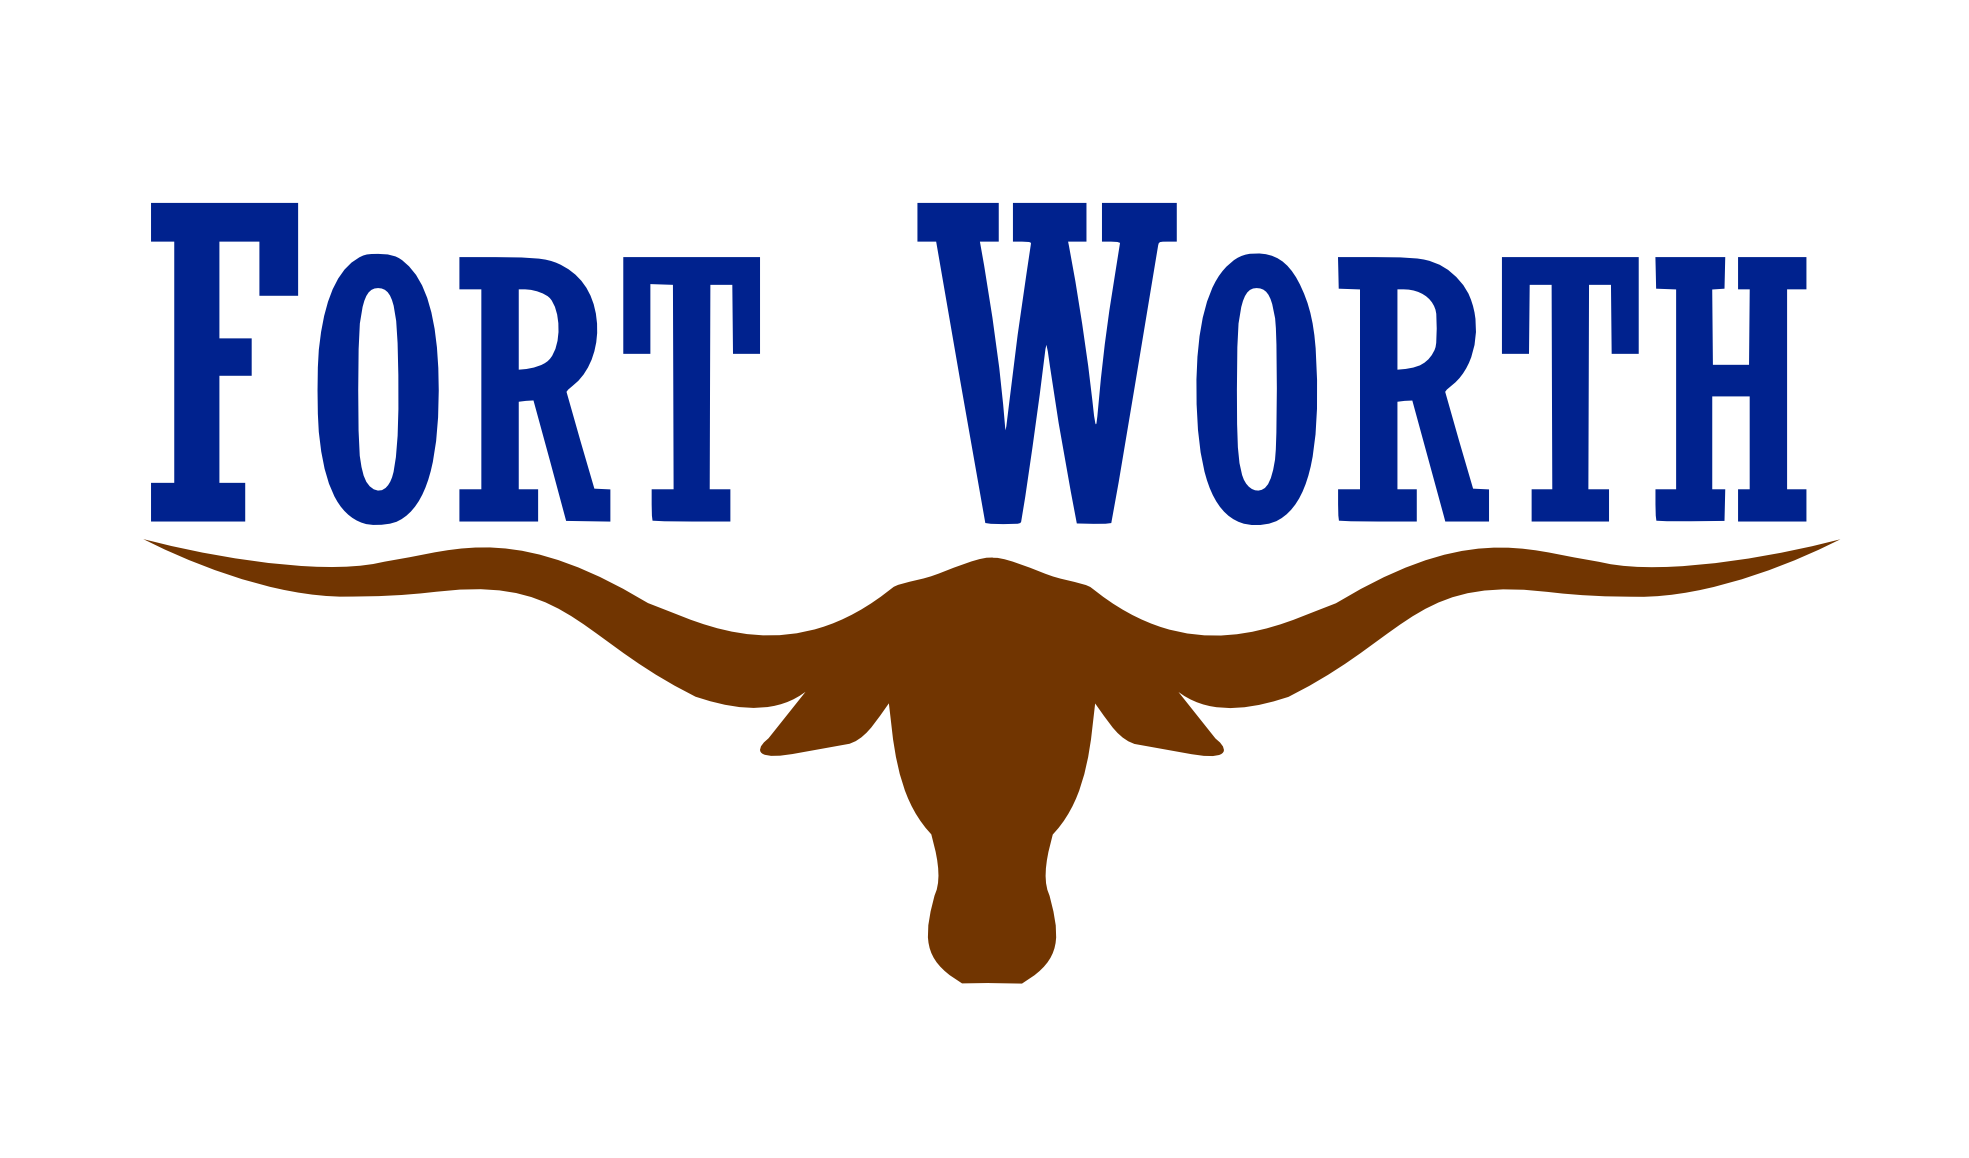 Flag of Fort Worth Texas Flags 2011 Clip Art SVG openclipart.